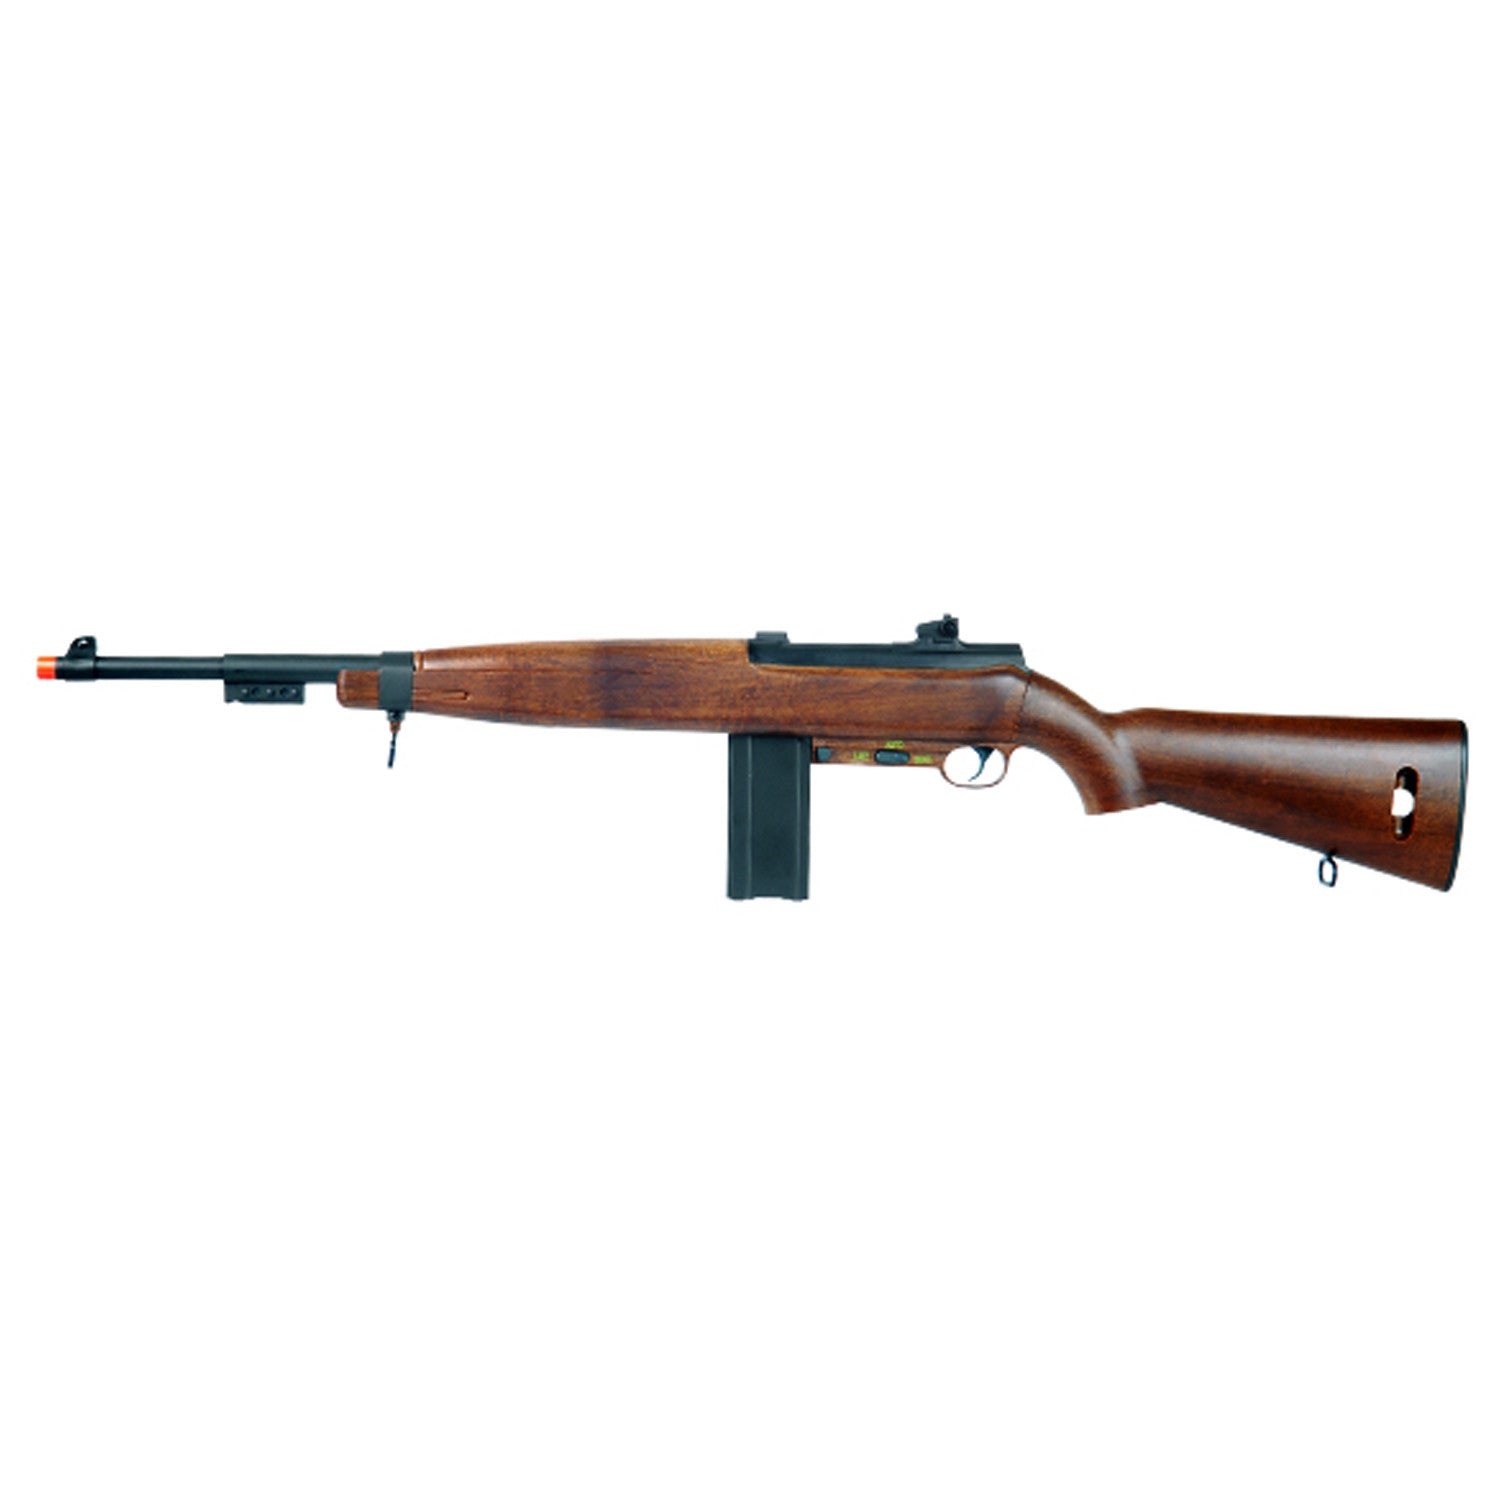 M1 Carbine Plastic Gearbox -      Durable ABS Gears     Thick ABS Plastic Construction     1:1 Scale     Adjustable Hop Up     Safe/Semi/Full Auto Selection Switch     Electric Powered     Battery Charge Time: 2.5 Hours     Effective Power Range: 1-50 Feet     Accuracy Range: 1-30 Feet     Maximum Range: 100 Feet